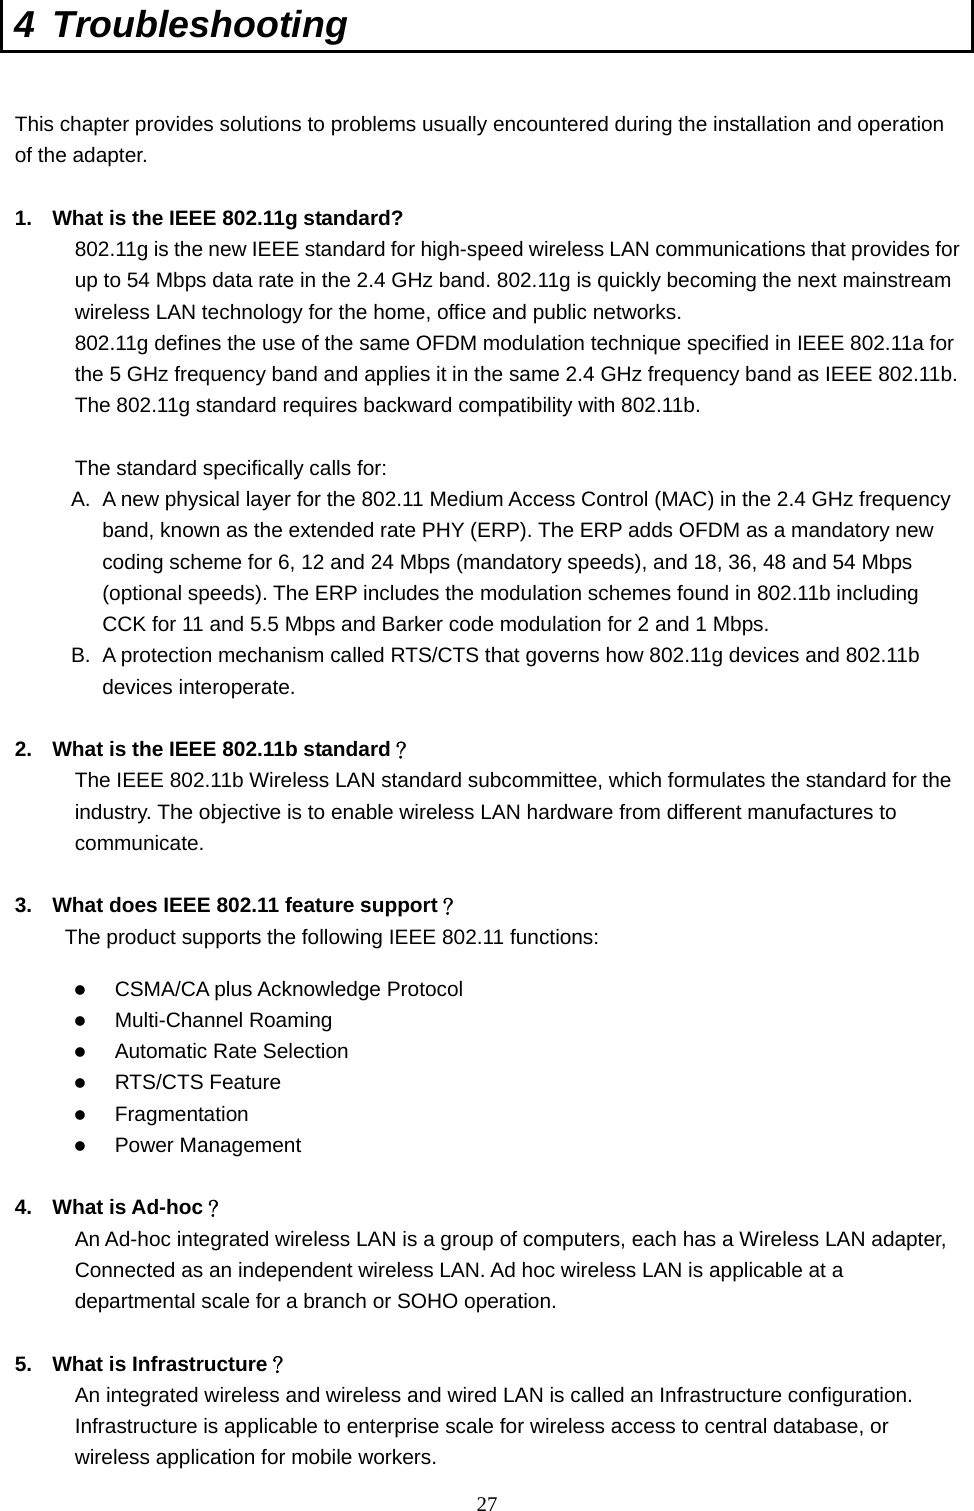  27 4 Troubleshooting  This chapter provides solutions to problems usually encountered during the installation and operation of the adapter.    1.  What is the IEEE 802.11g standard? 802.11g is the new IEEE standard for high-speed wireless LAN communications that provides for up to 54 Mbps data rate in the 2.4 GHz band. 802.11g is quickly becoming the next mainstream wireless LAN technology for the home, office and public networks.   802.11g defines the use of the same OFDM modulation technique specified in IEEE 802.11a for the 5 GHz frequency band and applies it in the same 2.4 GHz frequency band as IEEE 802.11b. The 802.11g standard requires backward compatibility with 802.11b.  The standard specifically calls for:   A.  A new physical layer for the 802.11 Medium Access Control (MAC) in the 2.4 GHz frequency band, known as the extended rate PHY (ERP). The ERP adds OFDM as a mandatory new coding scheme for 6, 12 and 24 Mbps (mandatory speeds), and 18, 36, 48 and 54 Mbps (optional speeds). The ERP includes the modulation schemes found in 802.11b including CCK for 11 and 5.5 Mbps and Barker code modulation for 2 and 1 Mbps. B.  A protection mechanism called RTS/CTS that governs how 802.11g devices and 802.11b devices interoperate.  2.  What is the IEEE 802.11b standard？ The IEEE 802.11b Wireless LAN standard subcommittee, which formulates the standard for the industry. The objective is to enable wireless LAN hardware from different manufactures to communicate.  3.  What does IEEE 802.11 feature support？ The product supports the following IEEE 802.11 functions:   CSMA/CA plus Acknowledge Protocol   Multi-Channel Roaming   Automatic Rate Selection   RTS/CTS Feature   Fragmentation   Power Management  4. What is Ad-hoc？ An Ad-hoc integrated wireless LAN is a group of computers, each has a Wireless LAN adapter, Connected as an independent wireless LAN. Ad hoc wireless LAN is applicable at a departmental scale for a branch or SOHO operation.  5.  What is Infrastructure？ An integrated wireless and wireless and wired LAN is called an Infrastructure configuration. Infrastructure is applicable to enterprise scale for wireless access to central database, or wireless application for mobile workers. 